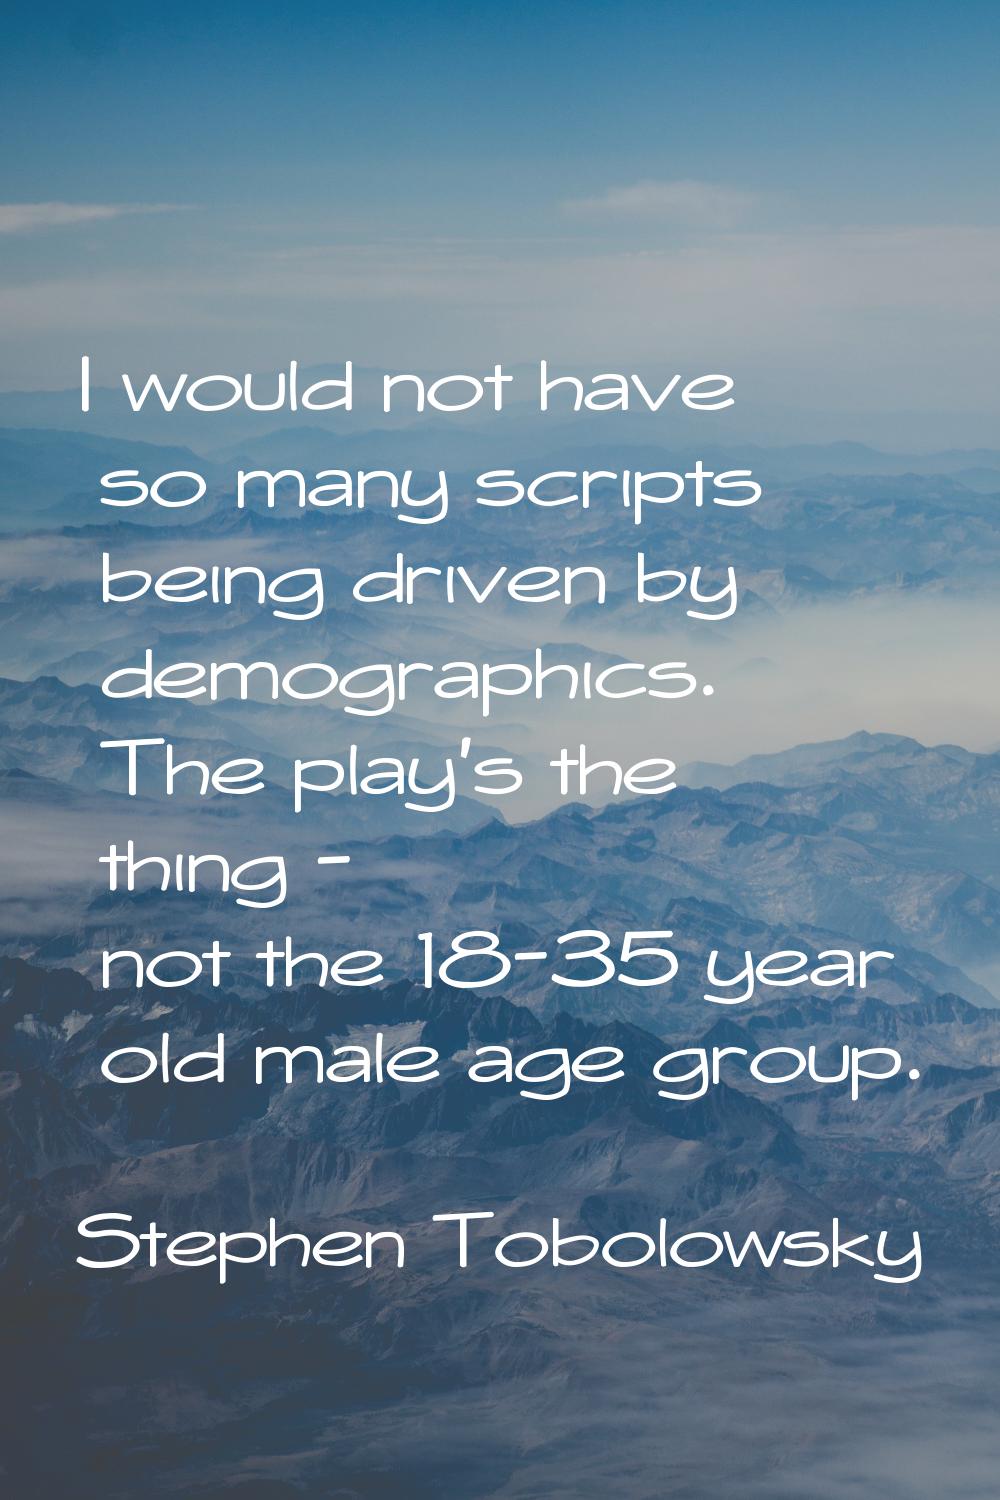 I would not have so many scripts being driven by demographics. The play's the thing - not the 18-35